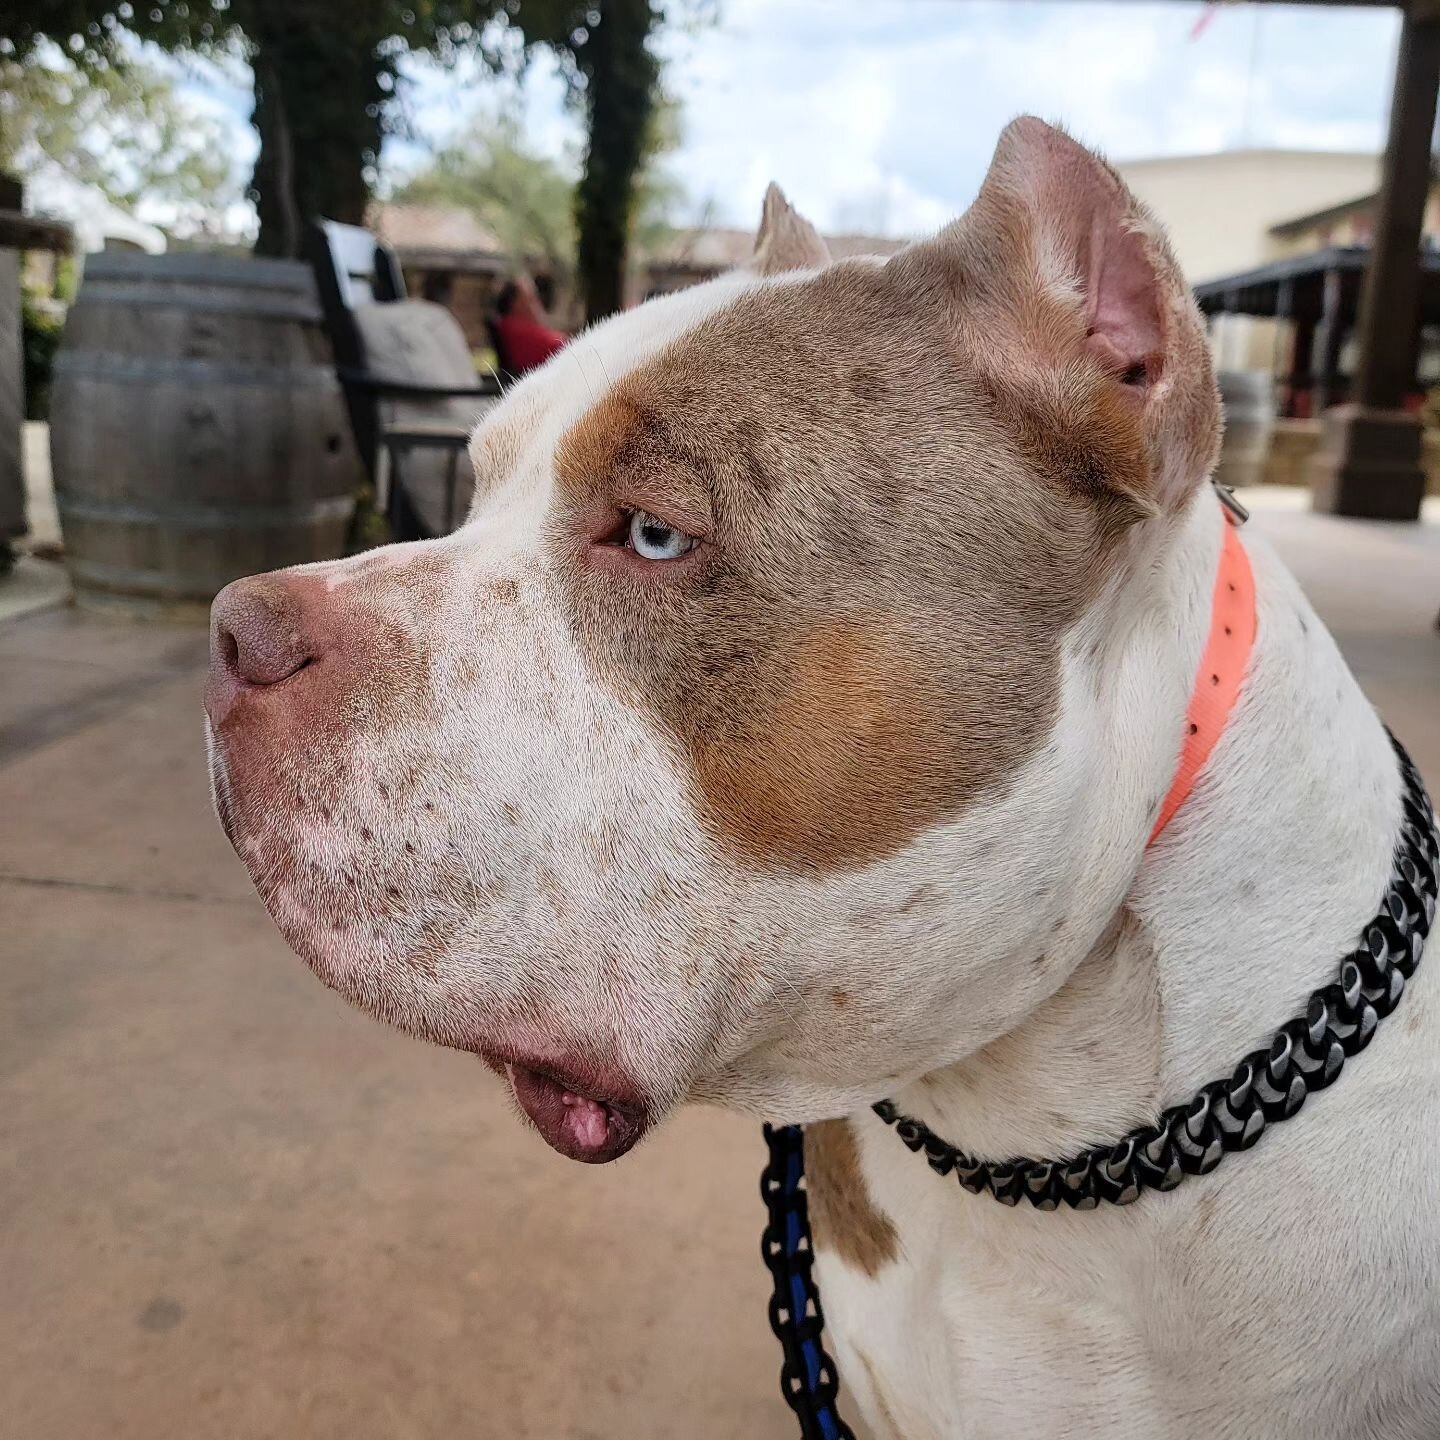 Tag a kennel who has a dog with a head like this 😍 We aiming for breed TYPE - This boy got me like 🤤🤤 ISSA BULLIES SAINT ✝️ #open for stud 💦💦 #embark CLEAR ✅️

#ambully #xlamericanbully #abkc #bullyworldwide #bullynation #bwwmag #dogsofinstagram